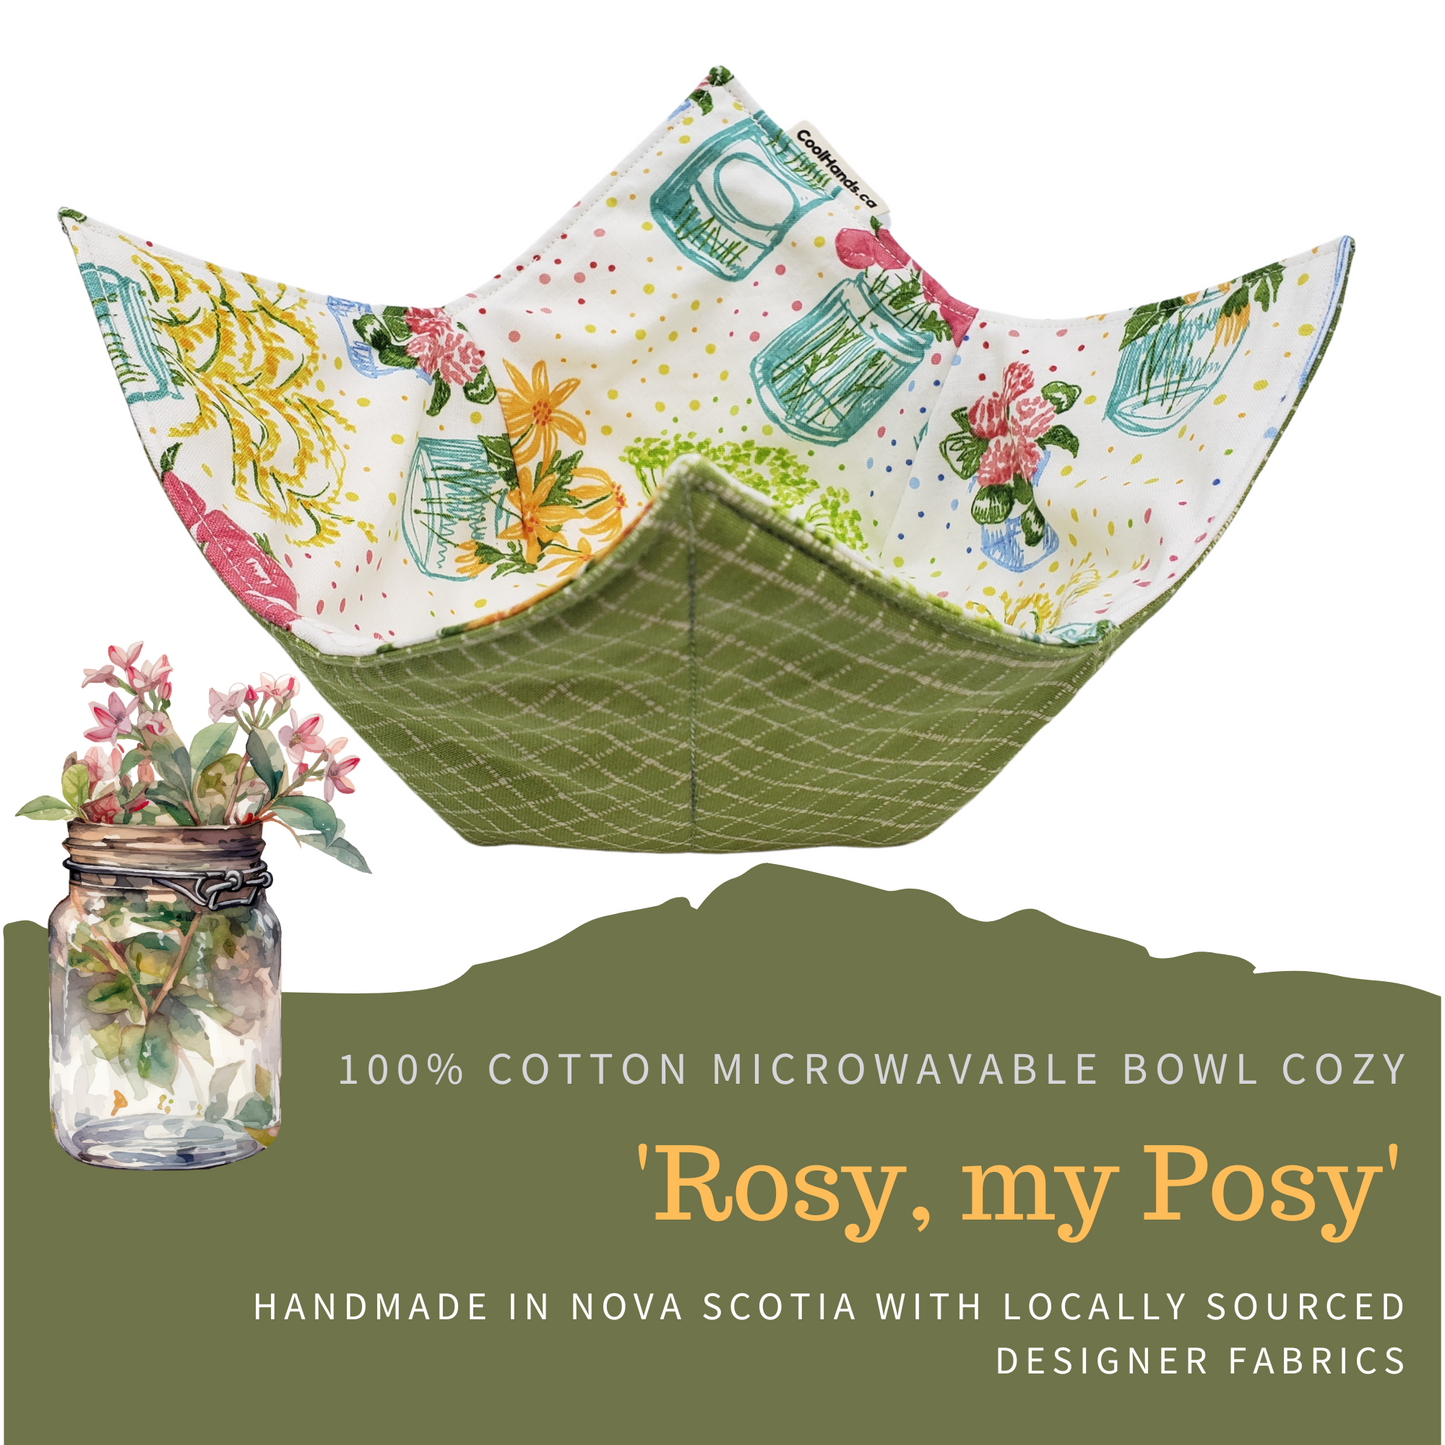 100% Cotton Microwavable Bowl Cozy - 'Rosy, my Posy'